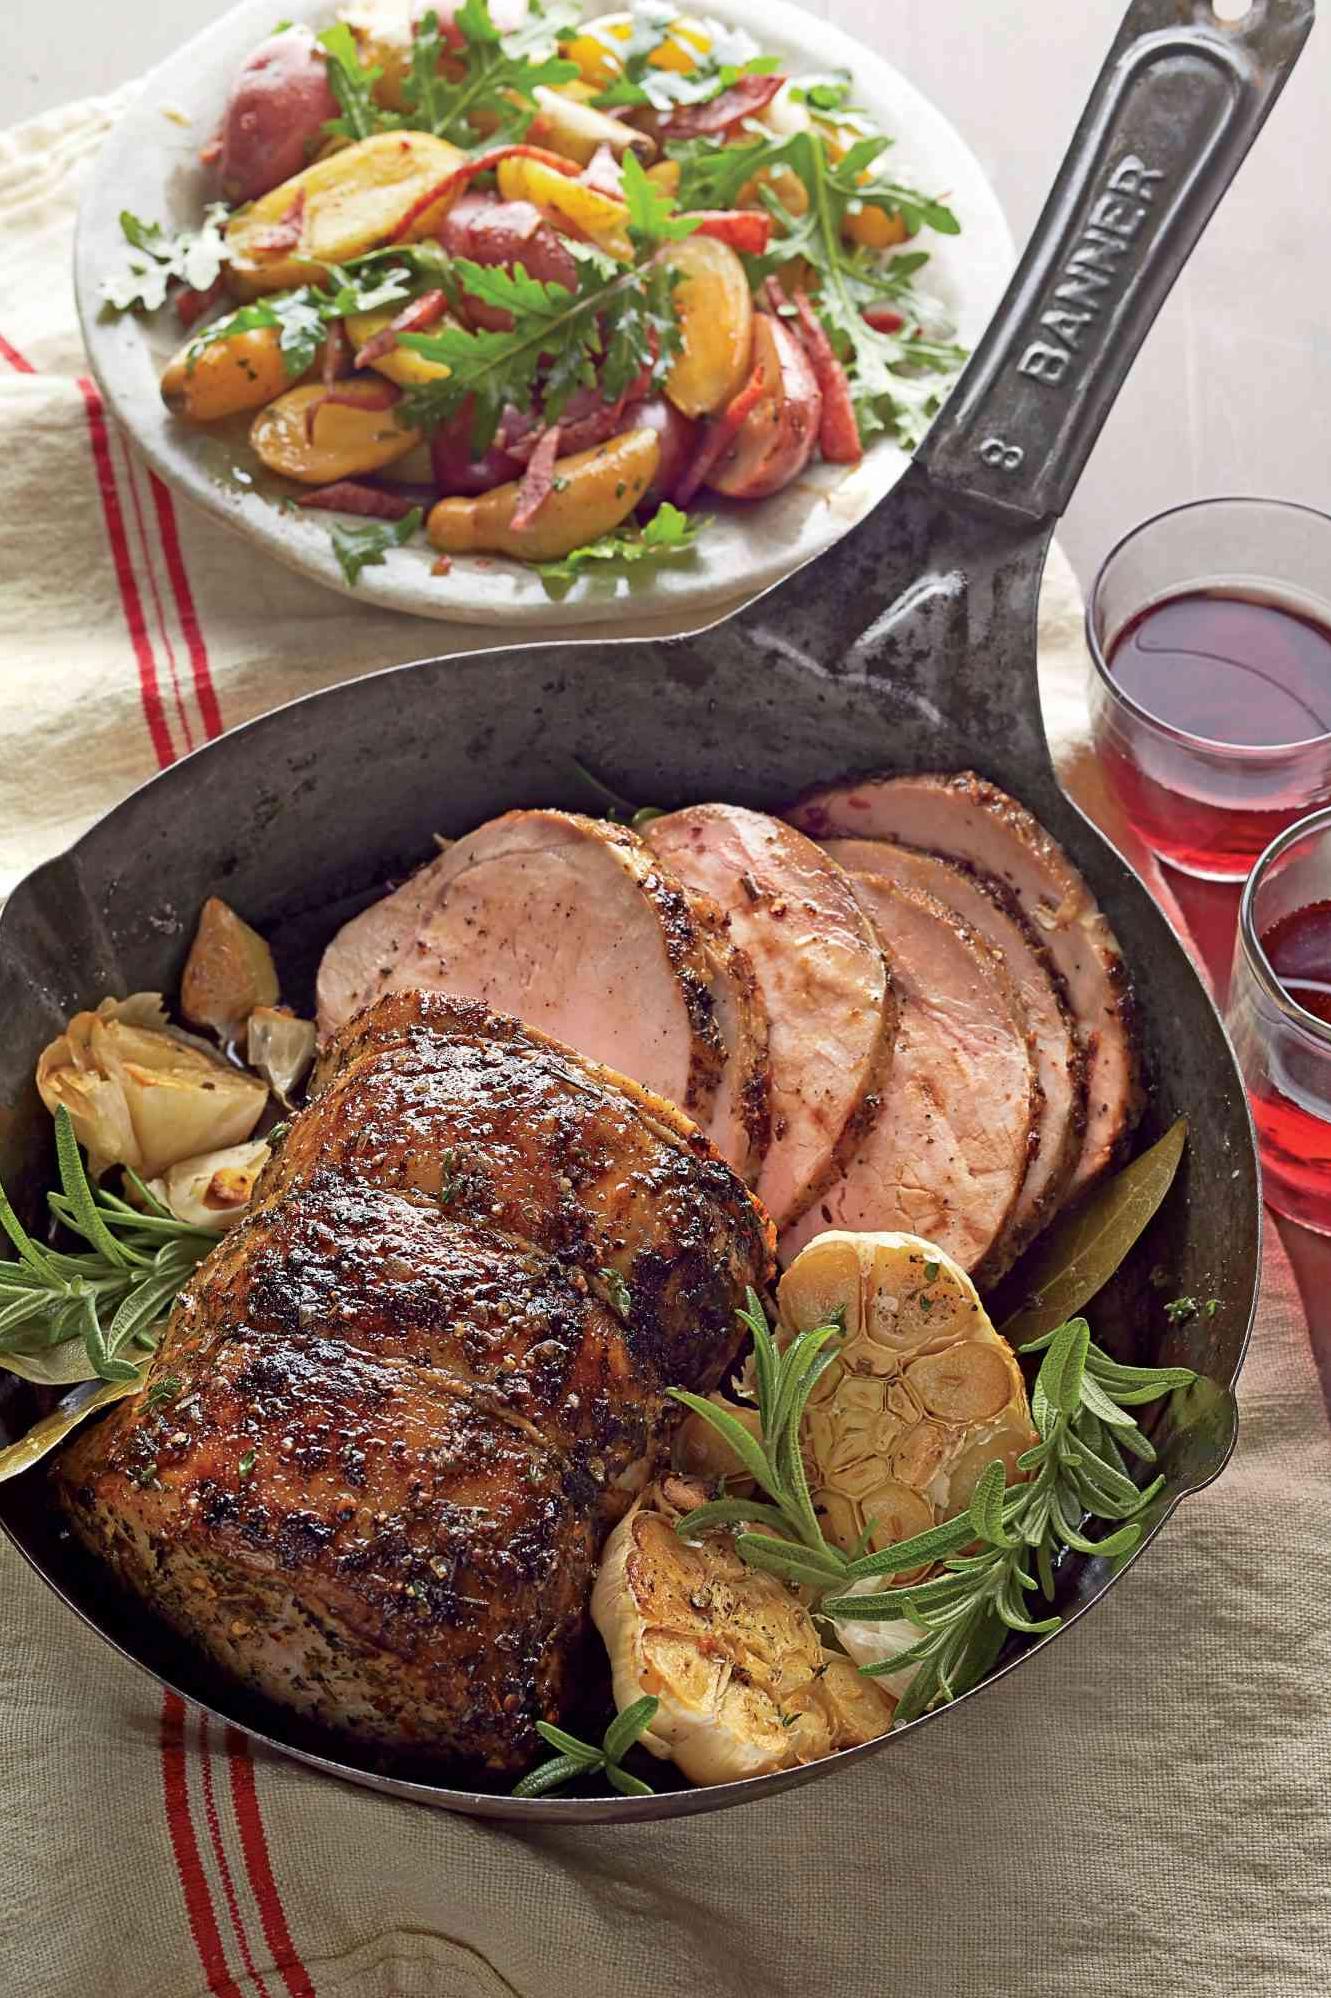  The juiciest Oven Baked Southern Pork Loin you'll ever taste!